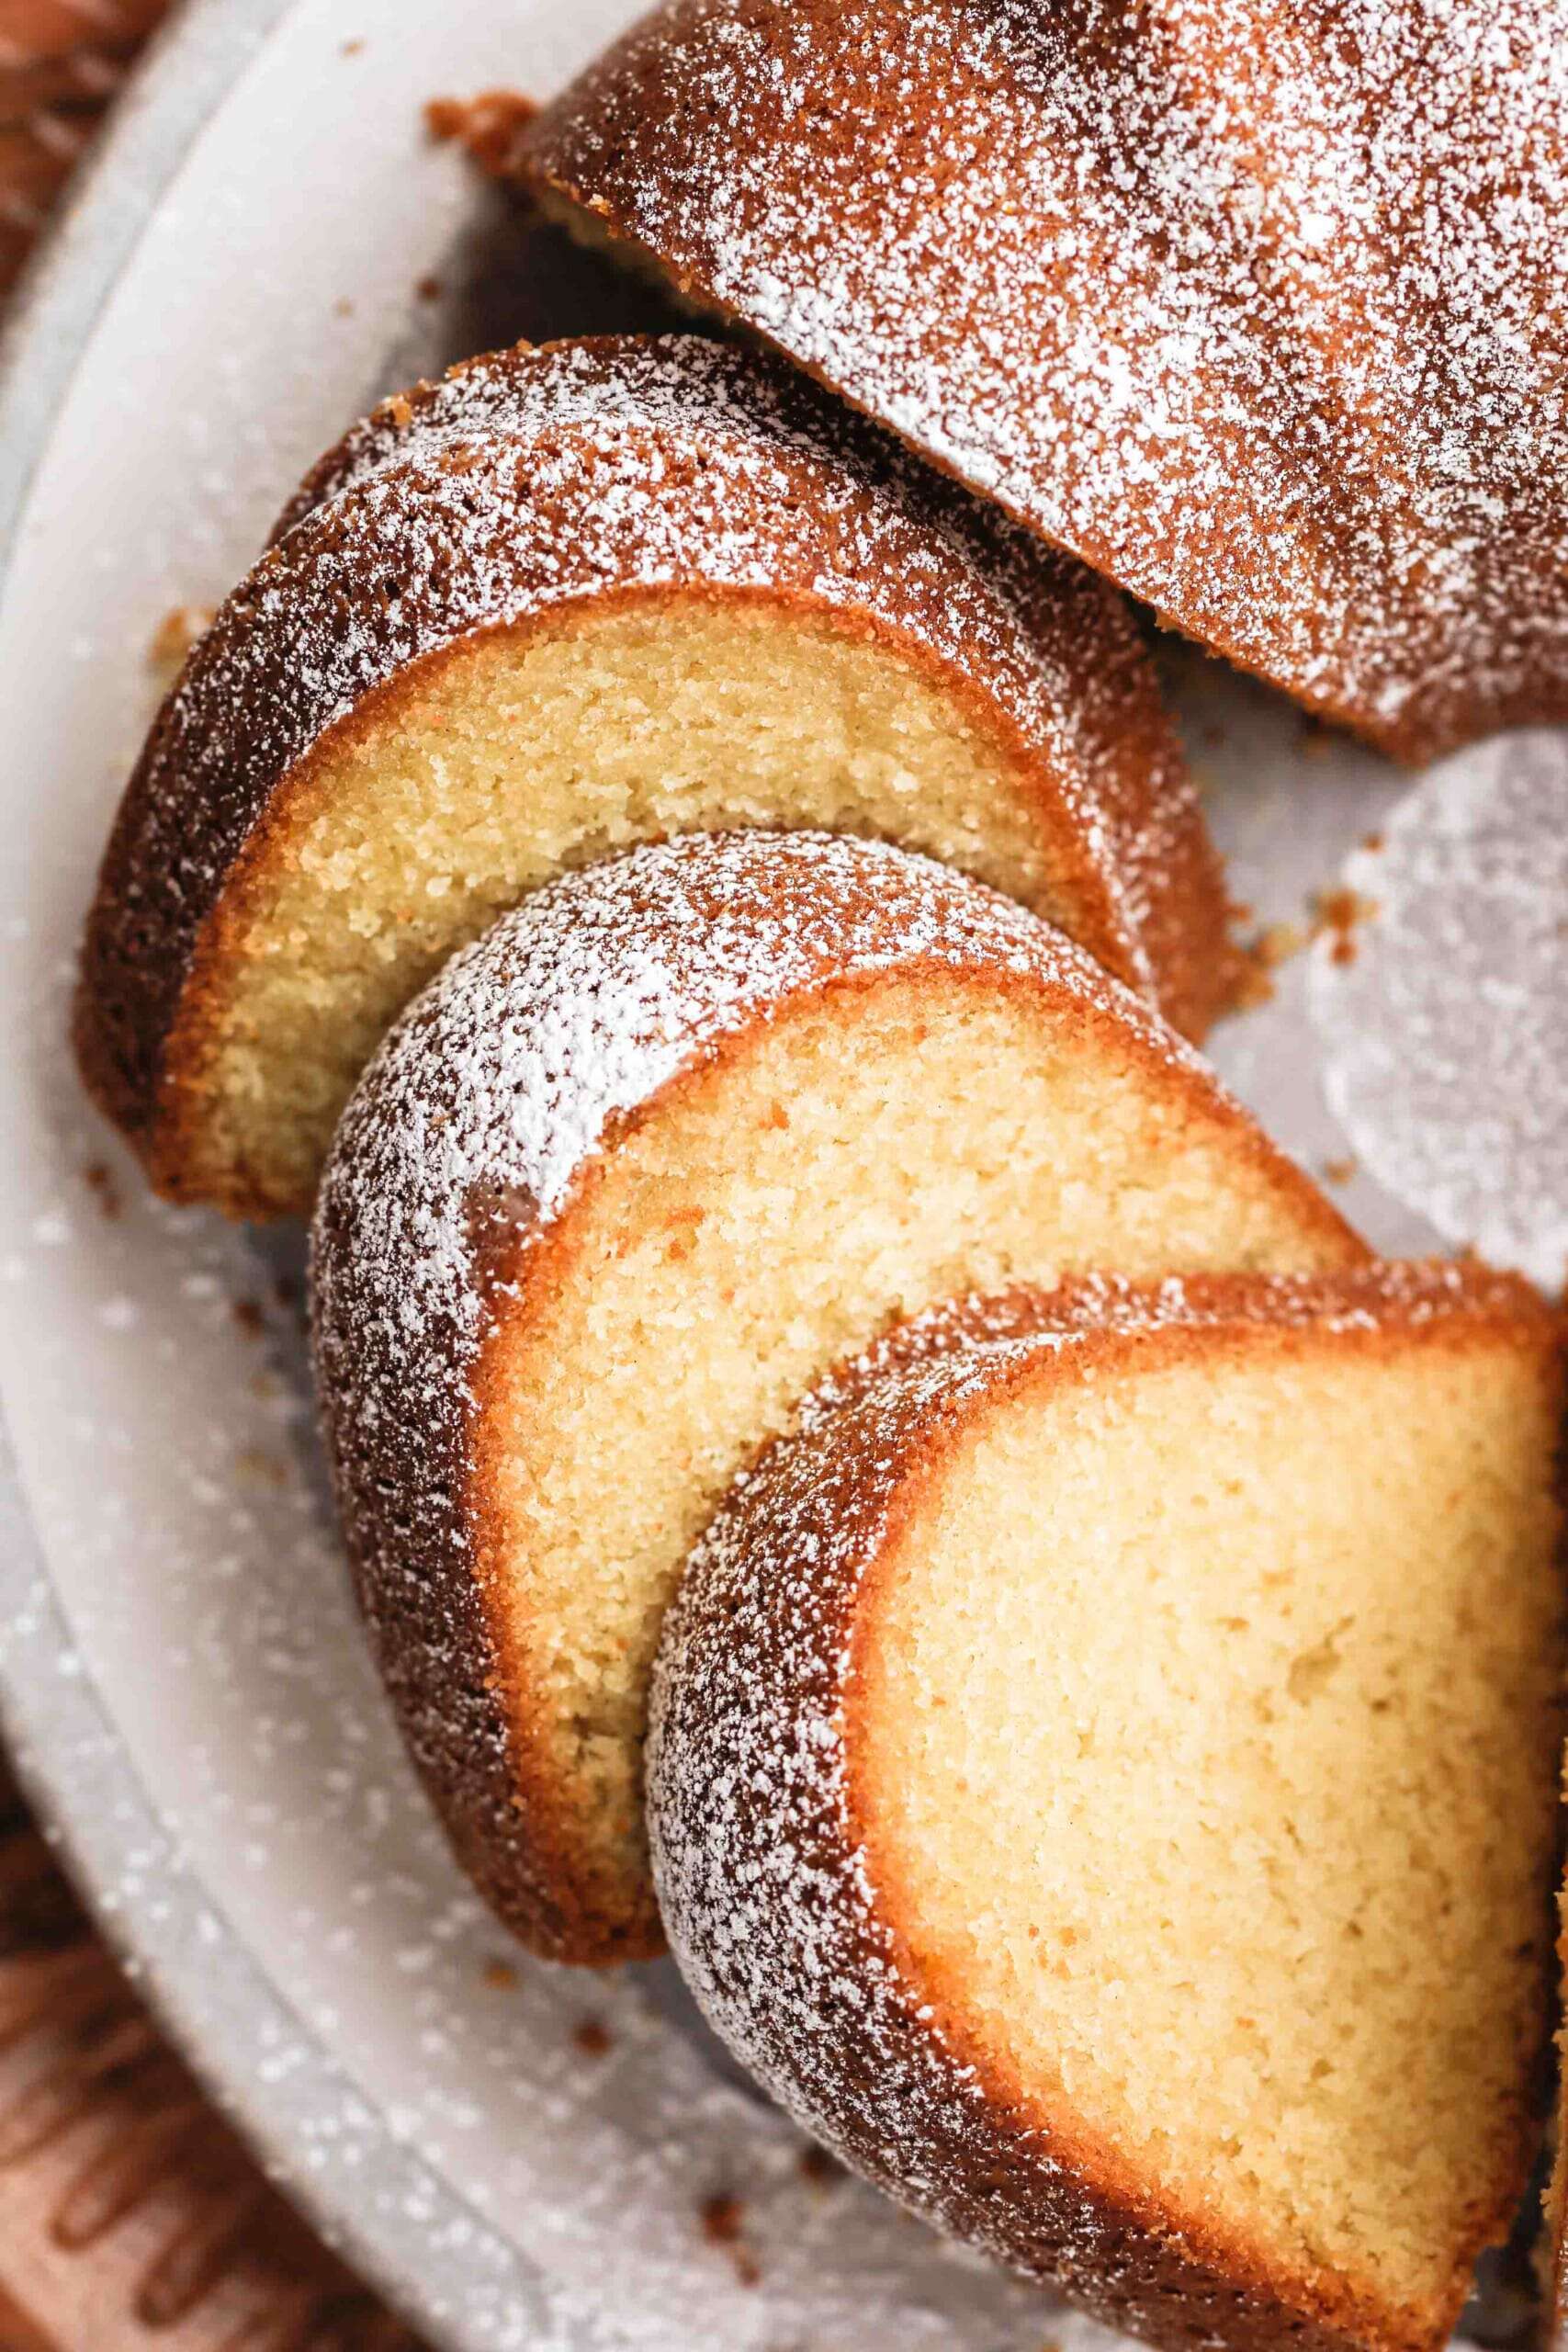 Prepare your Bundt pan for easy cake extraction using 'cake goop